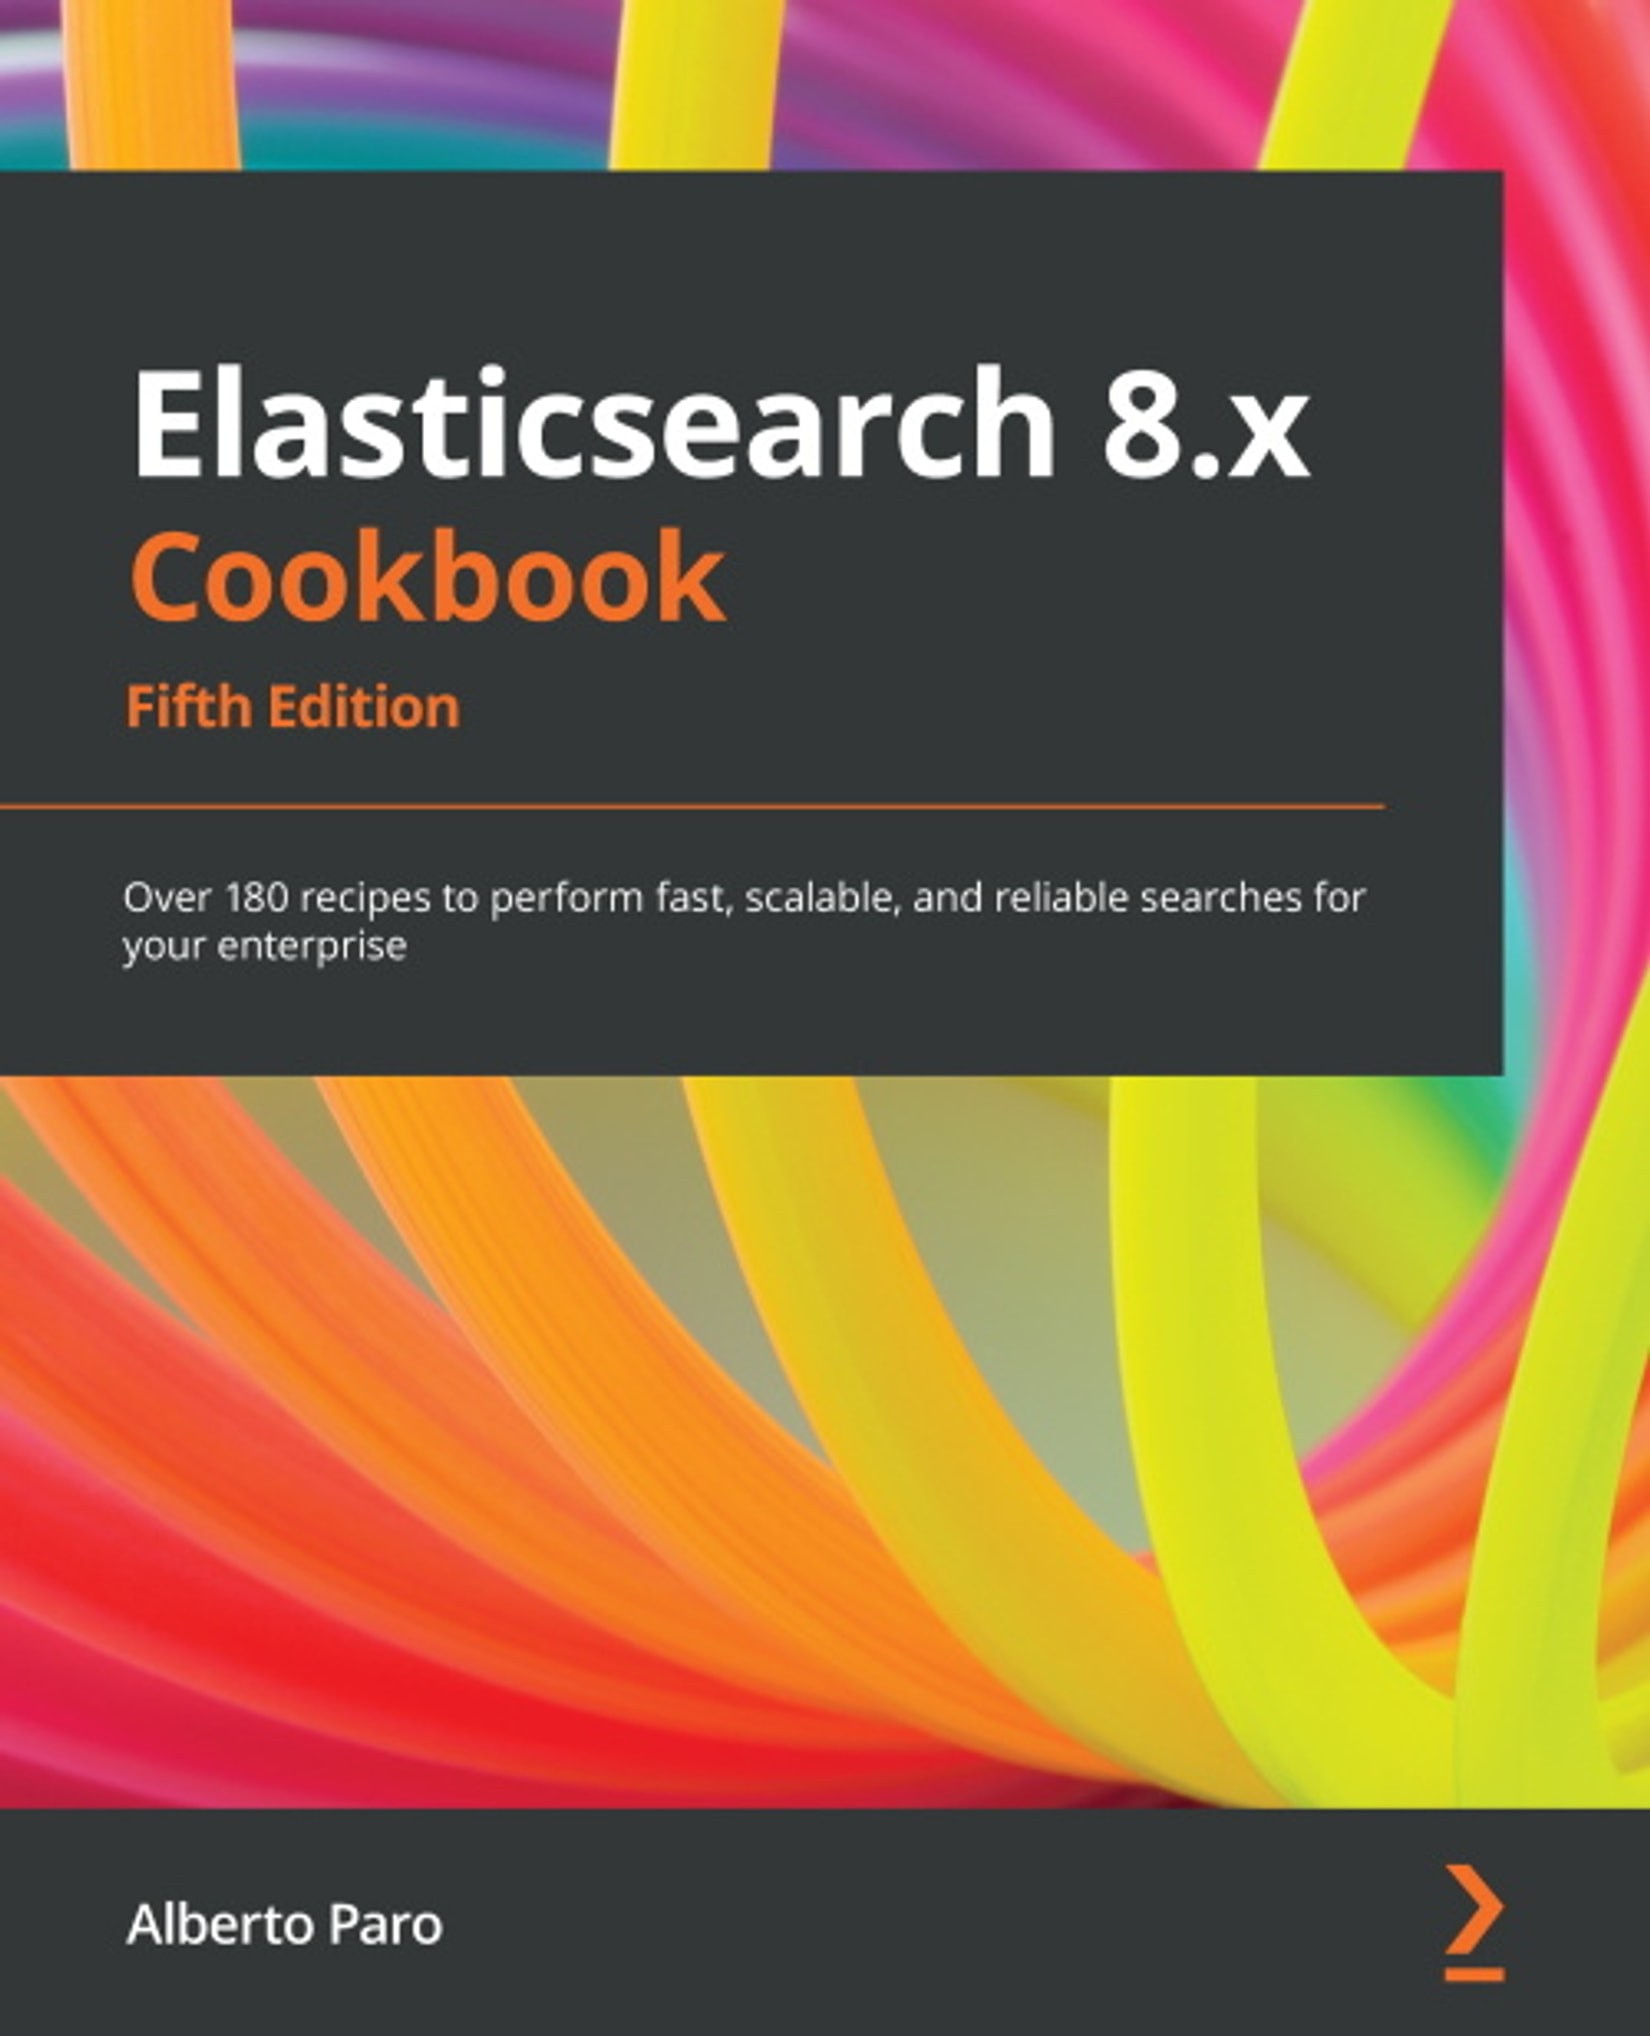 Elasticsearch 8.x Cookbook - Fifth Edition: Over 180 Recipes to Perform Fast, Scalable, and Reliable Searches for Your Enterprise